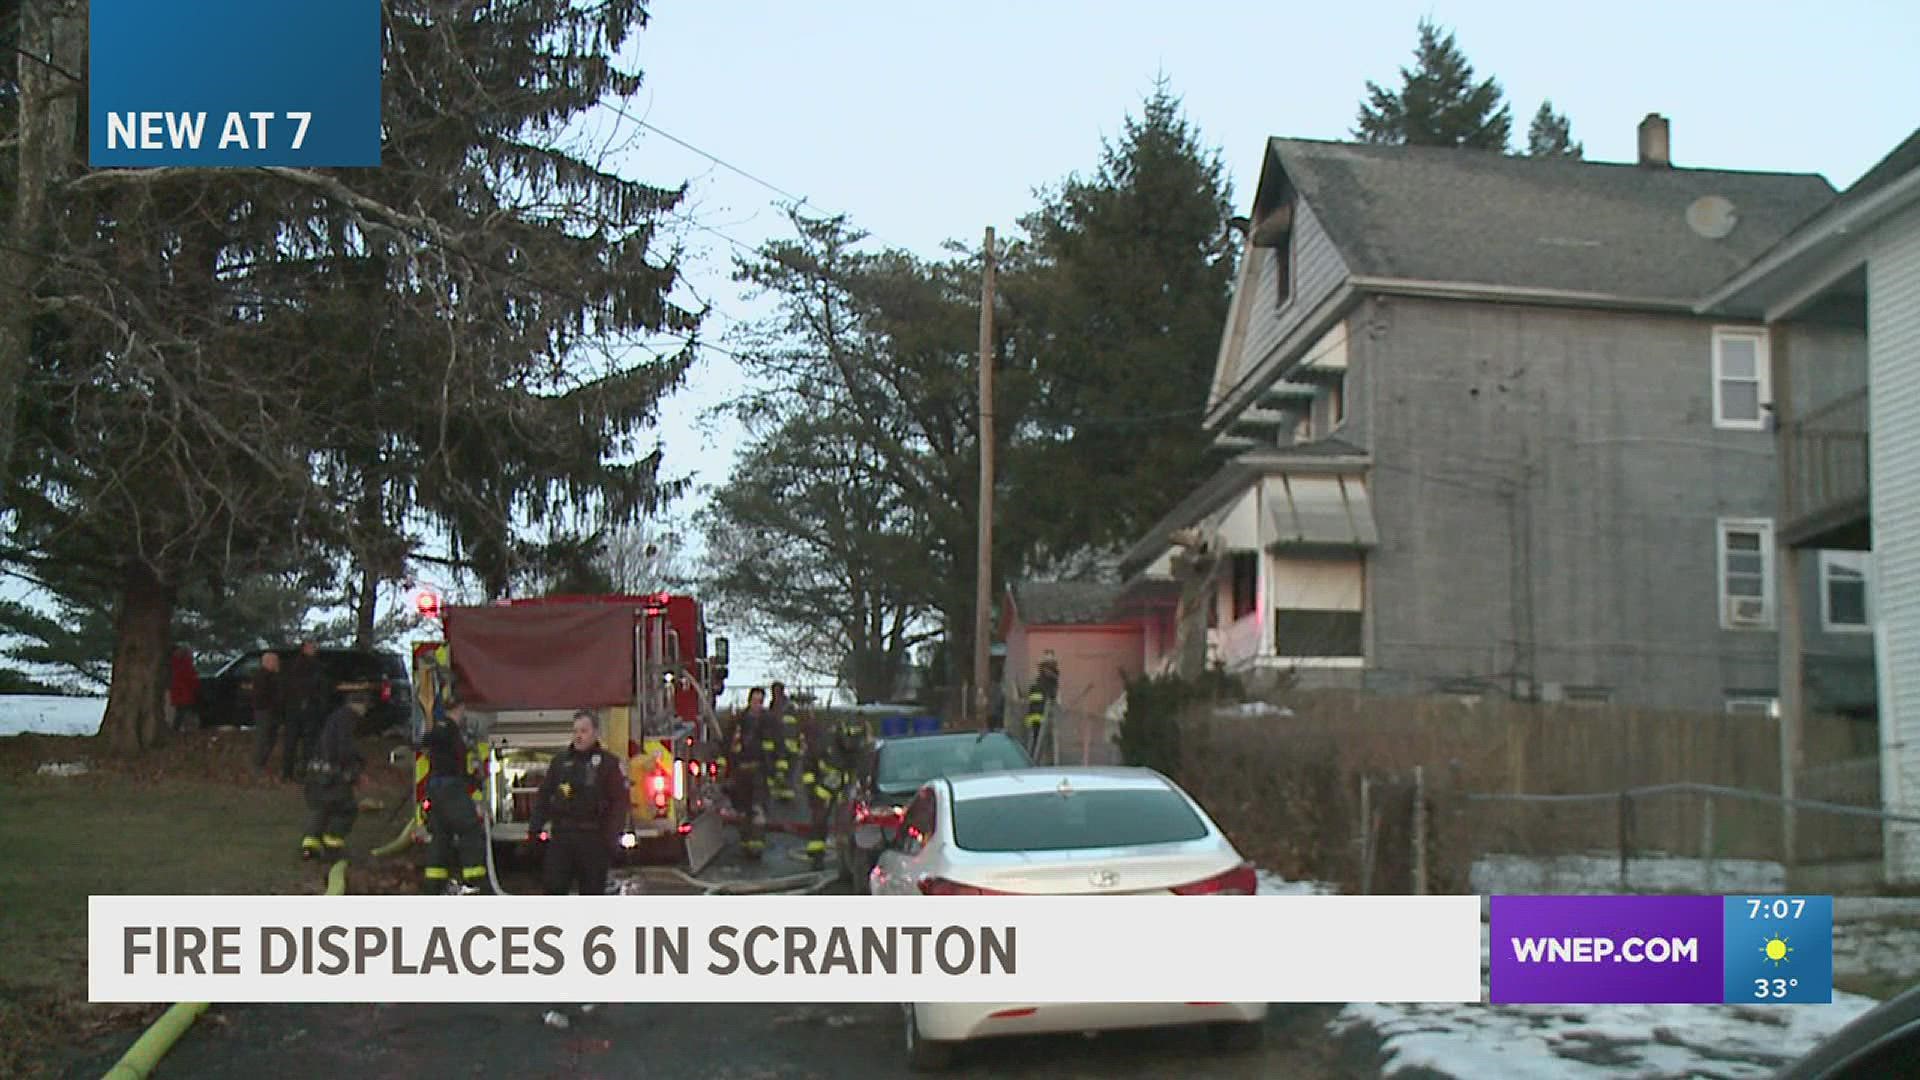 The cause of the fire in Scranton is under investigation.